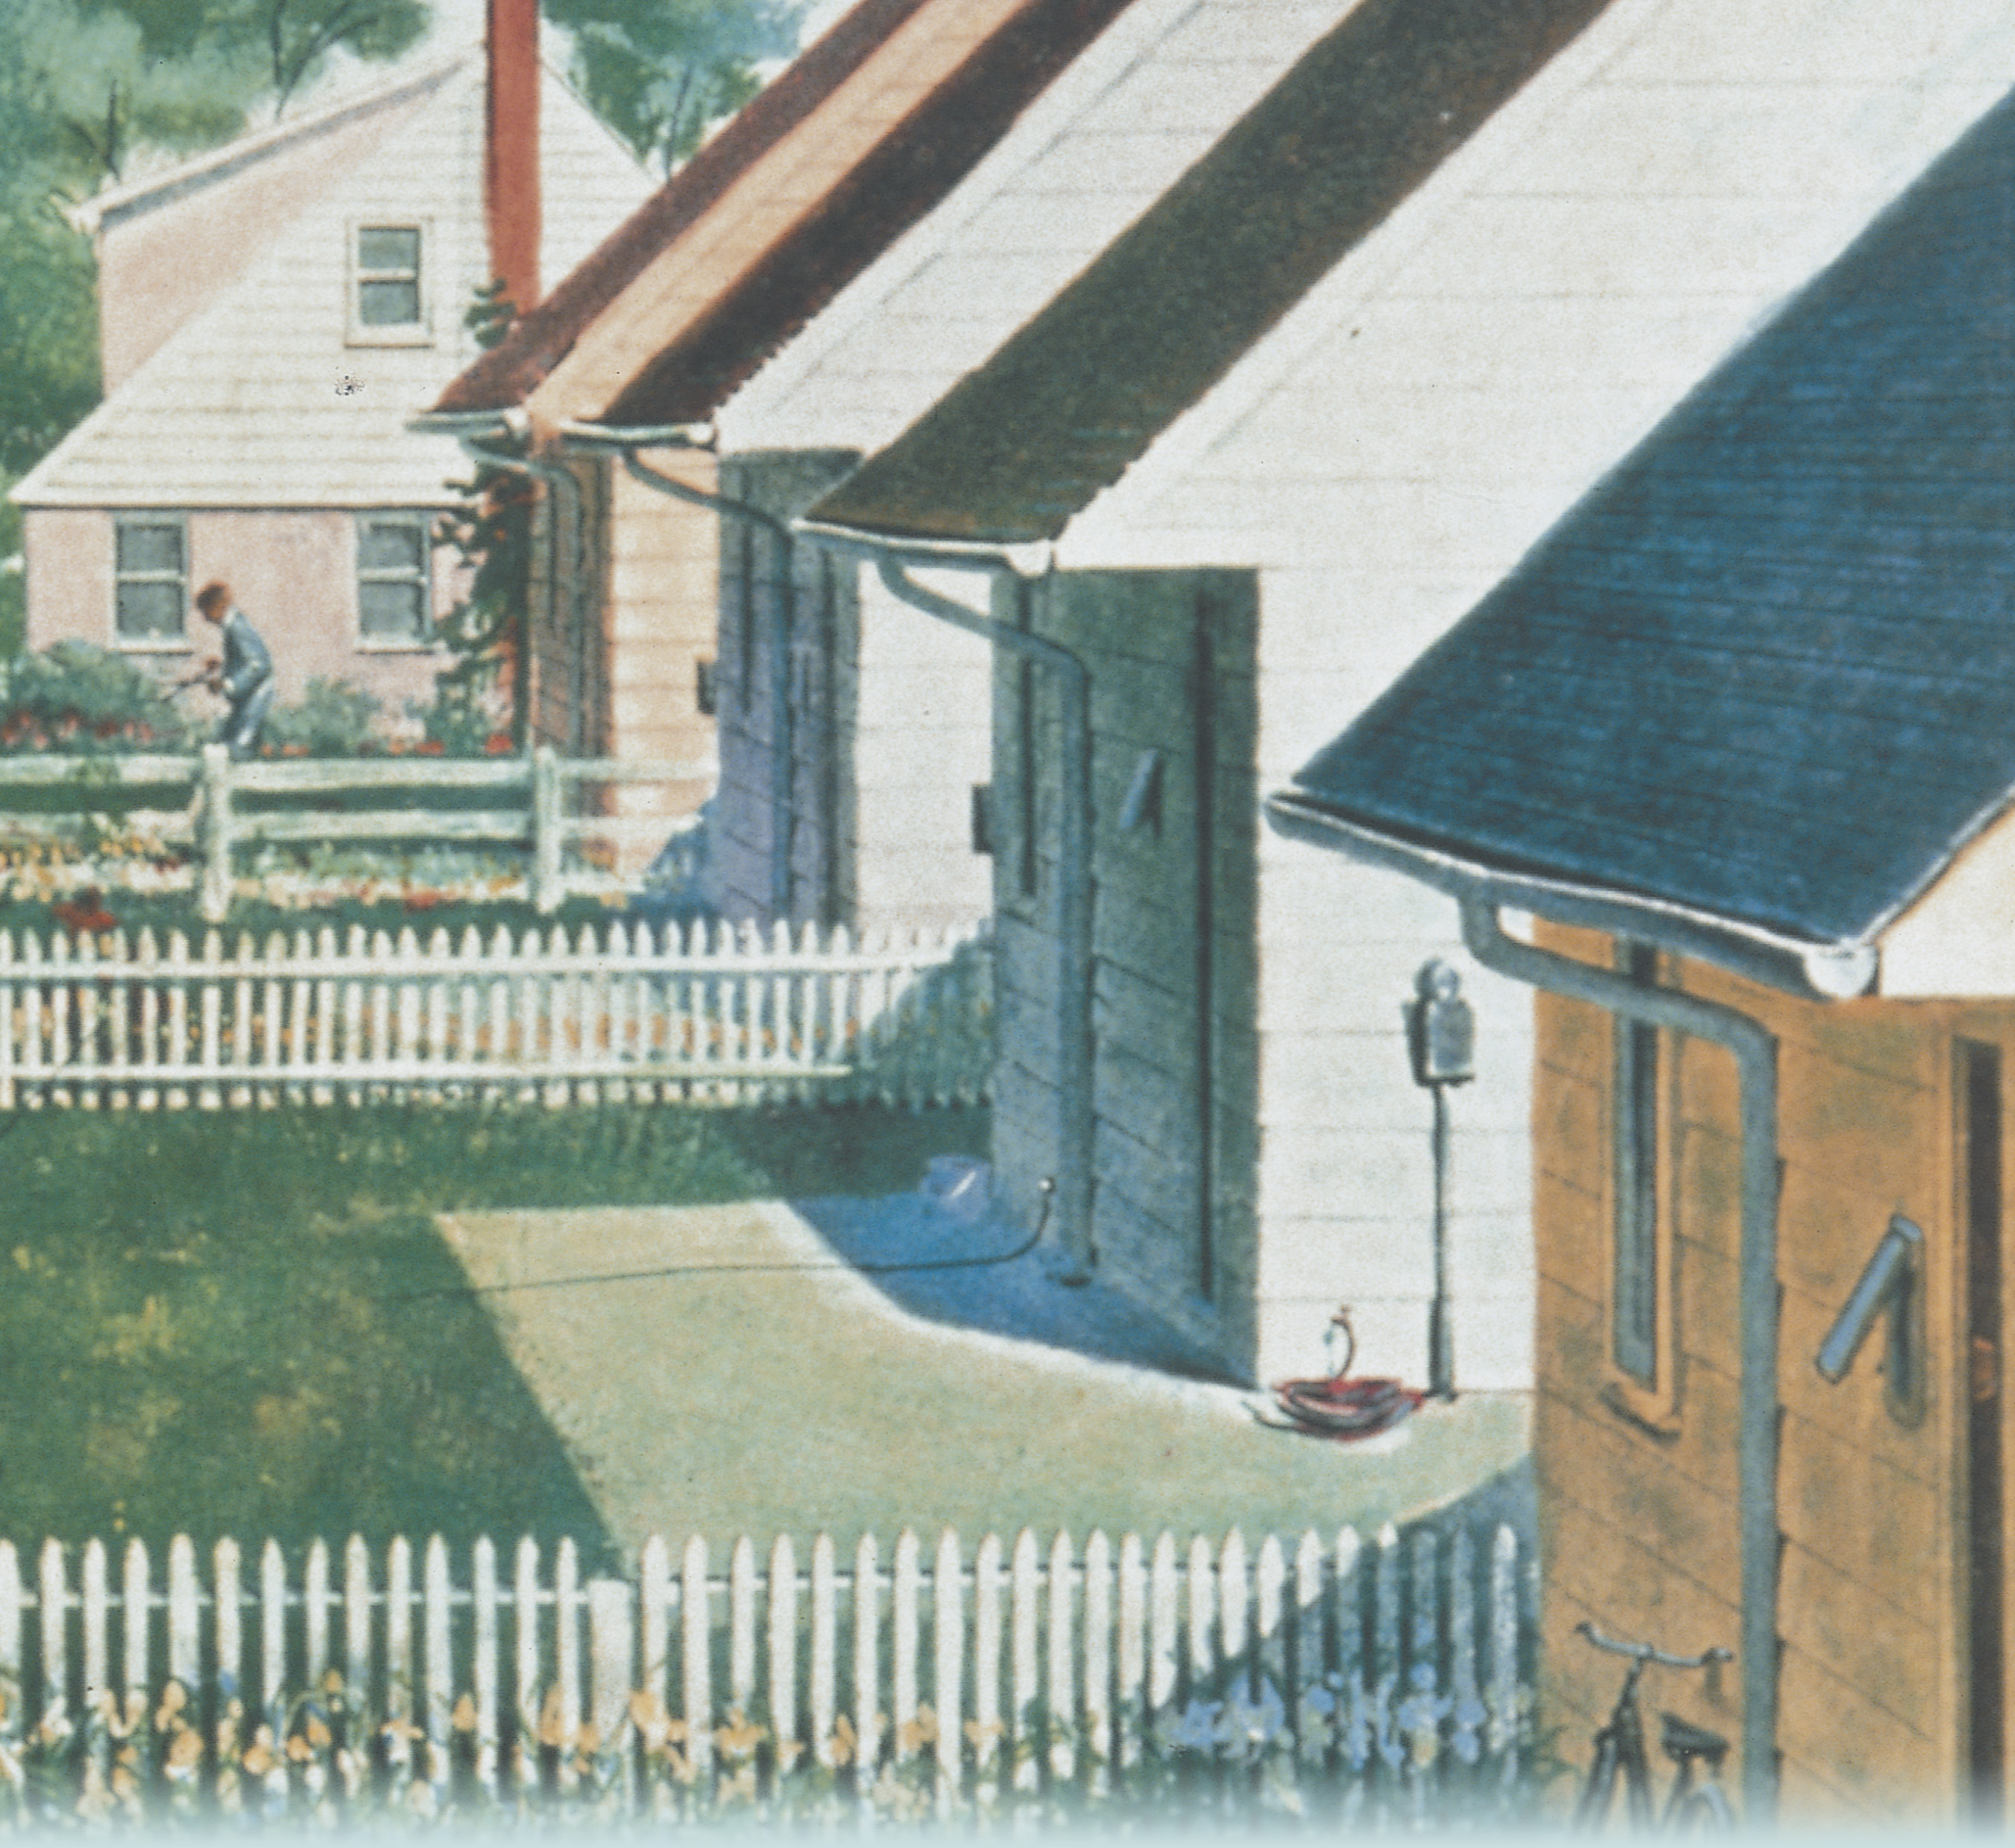 Illustration: Yards separated by fences